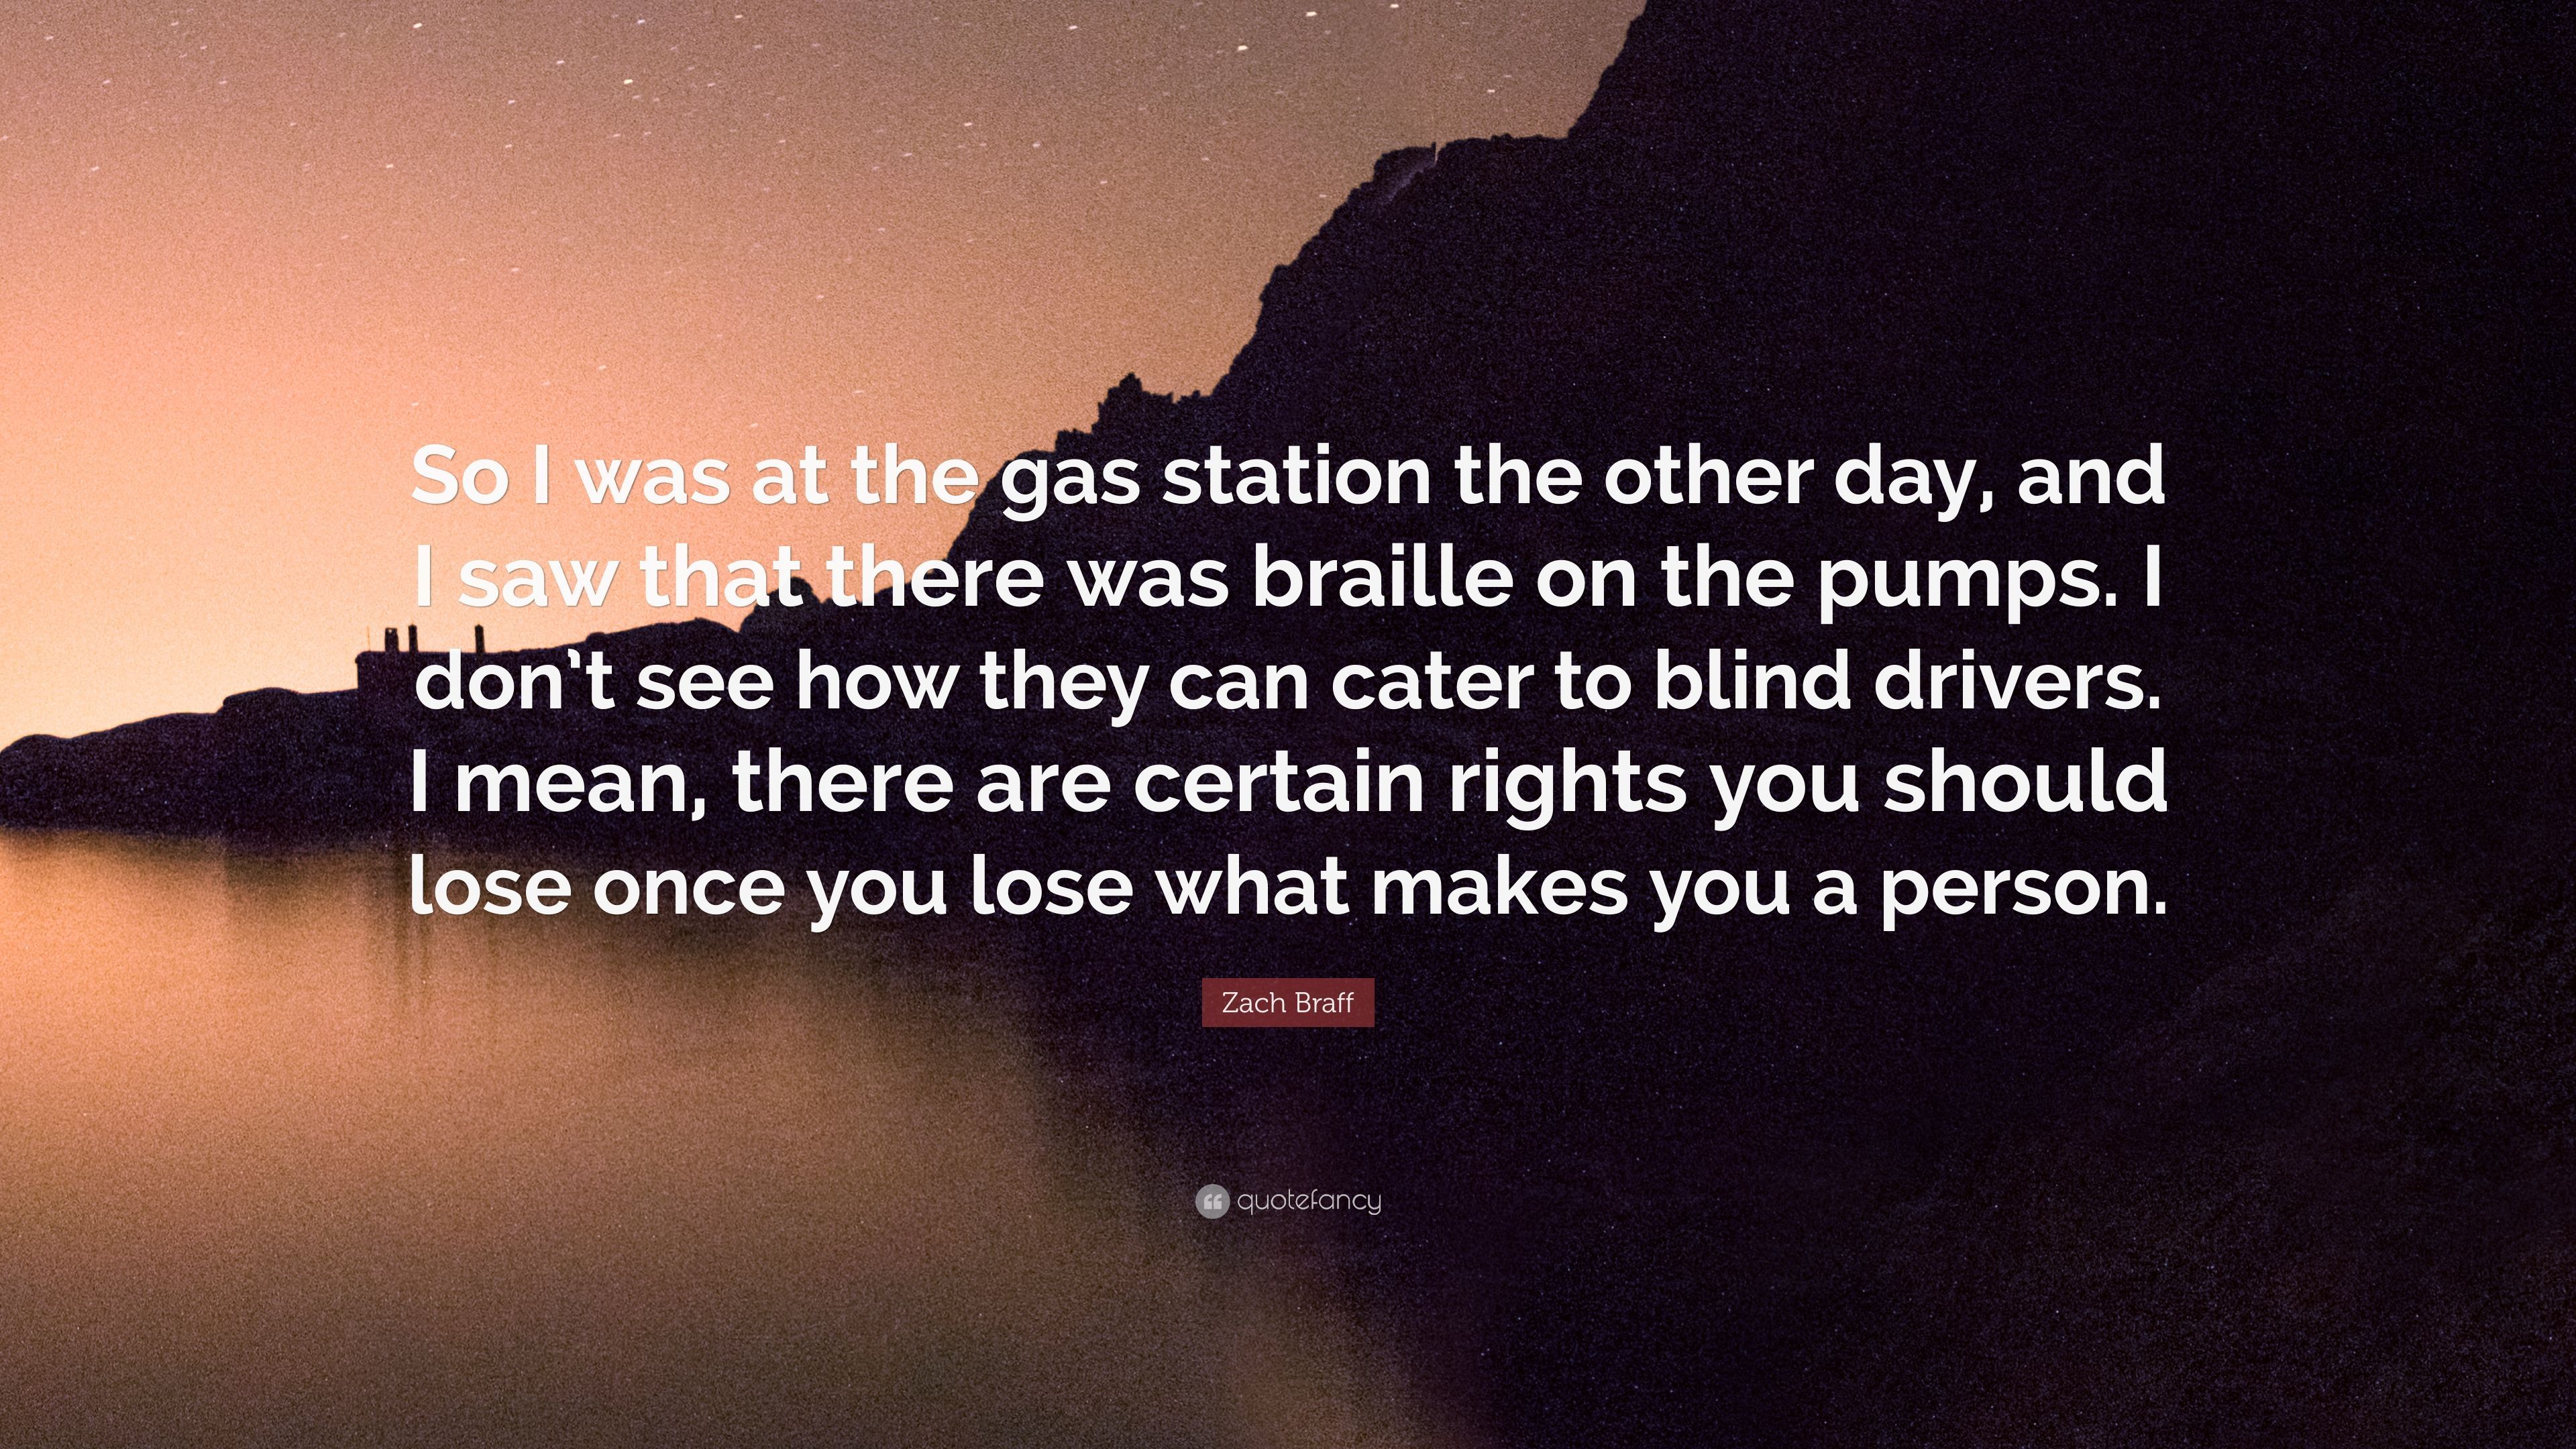 Zach Braff Quote: "So I was at the gas station the other day, and I 